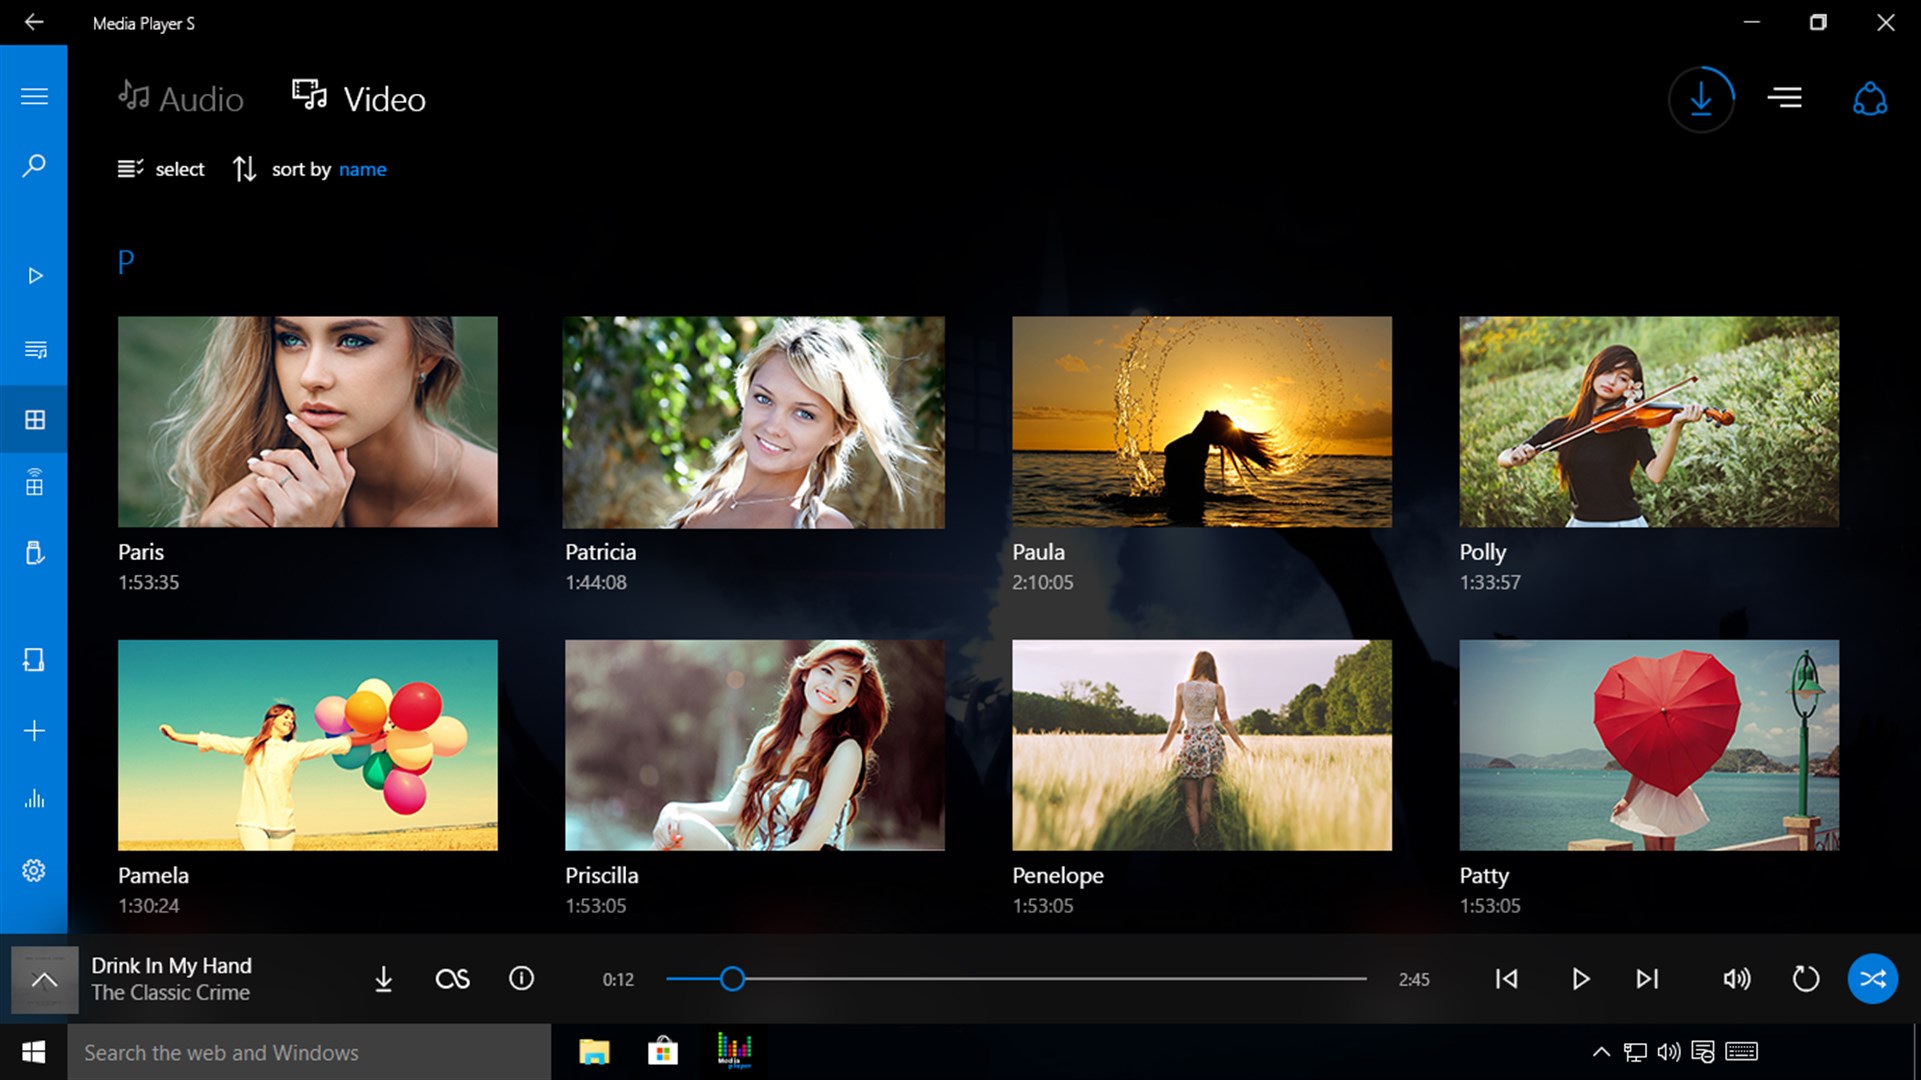 Microsoft player. Video Player for Windows 10. Video Player for win 10 app.